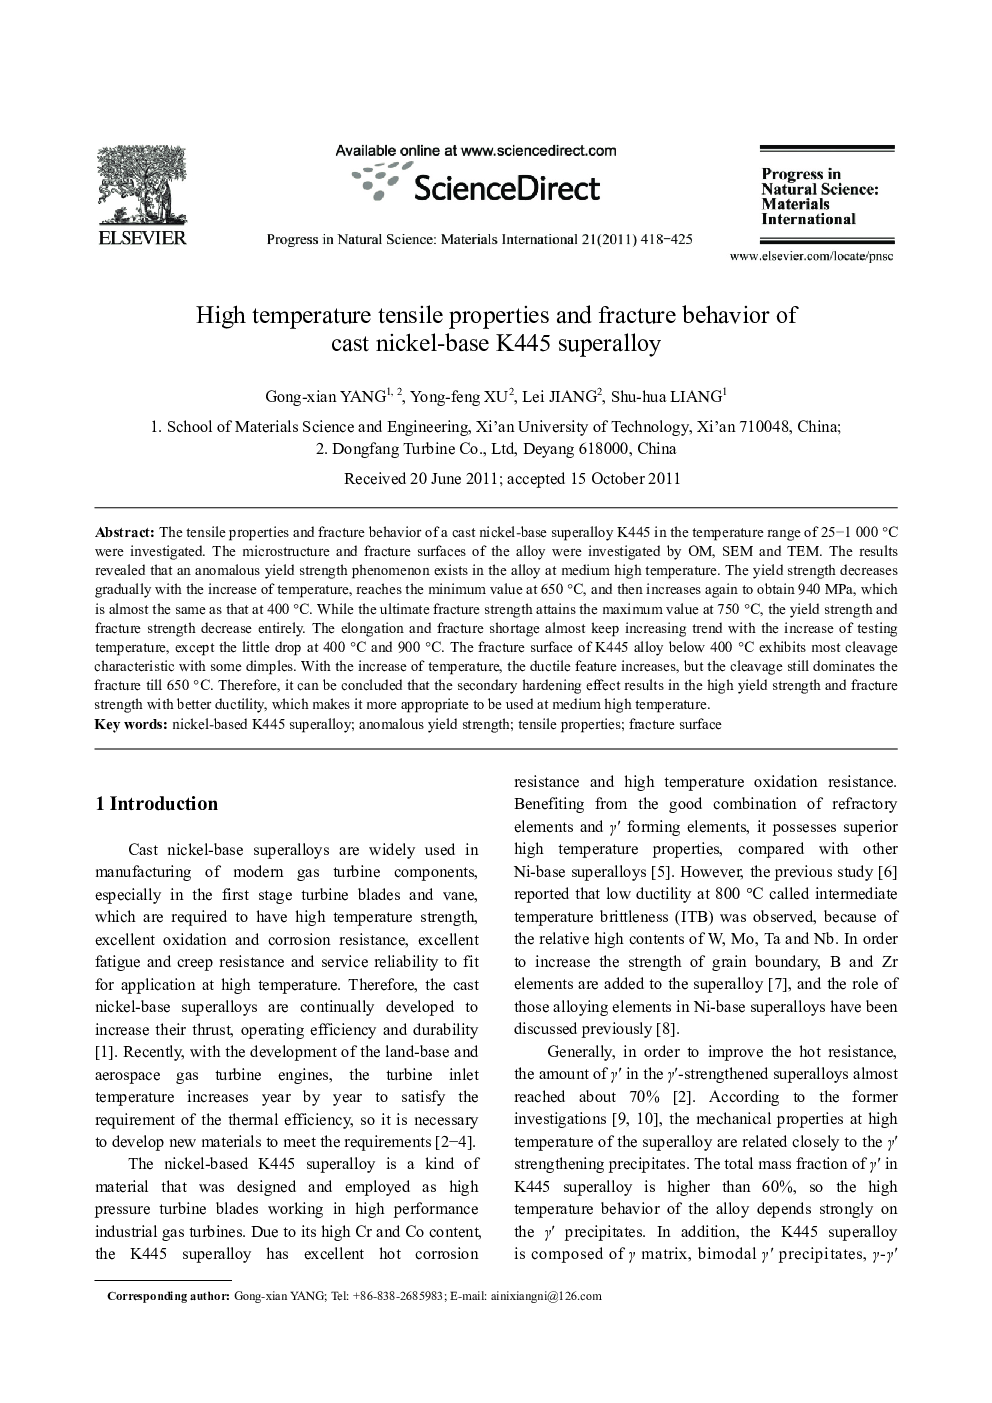 High temperature tensile properties and fracture behavior of cast nickel-base K445 superalloy